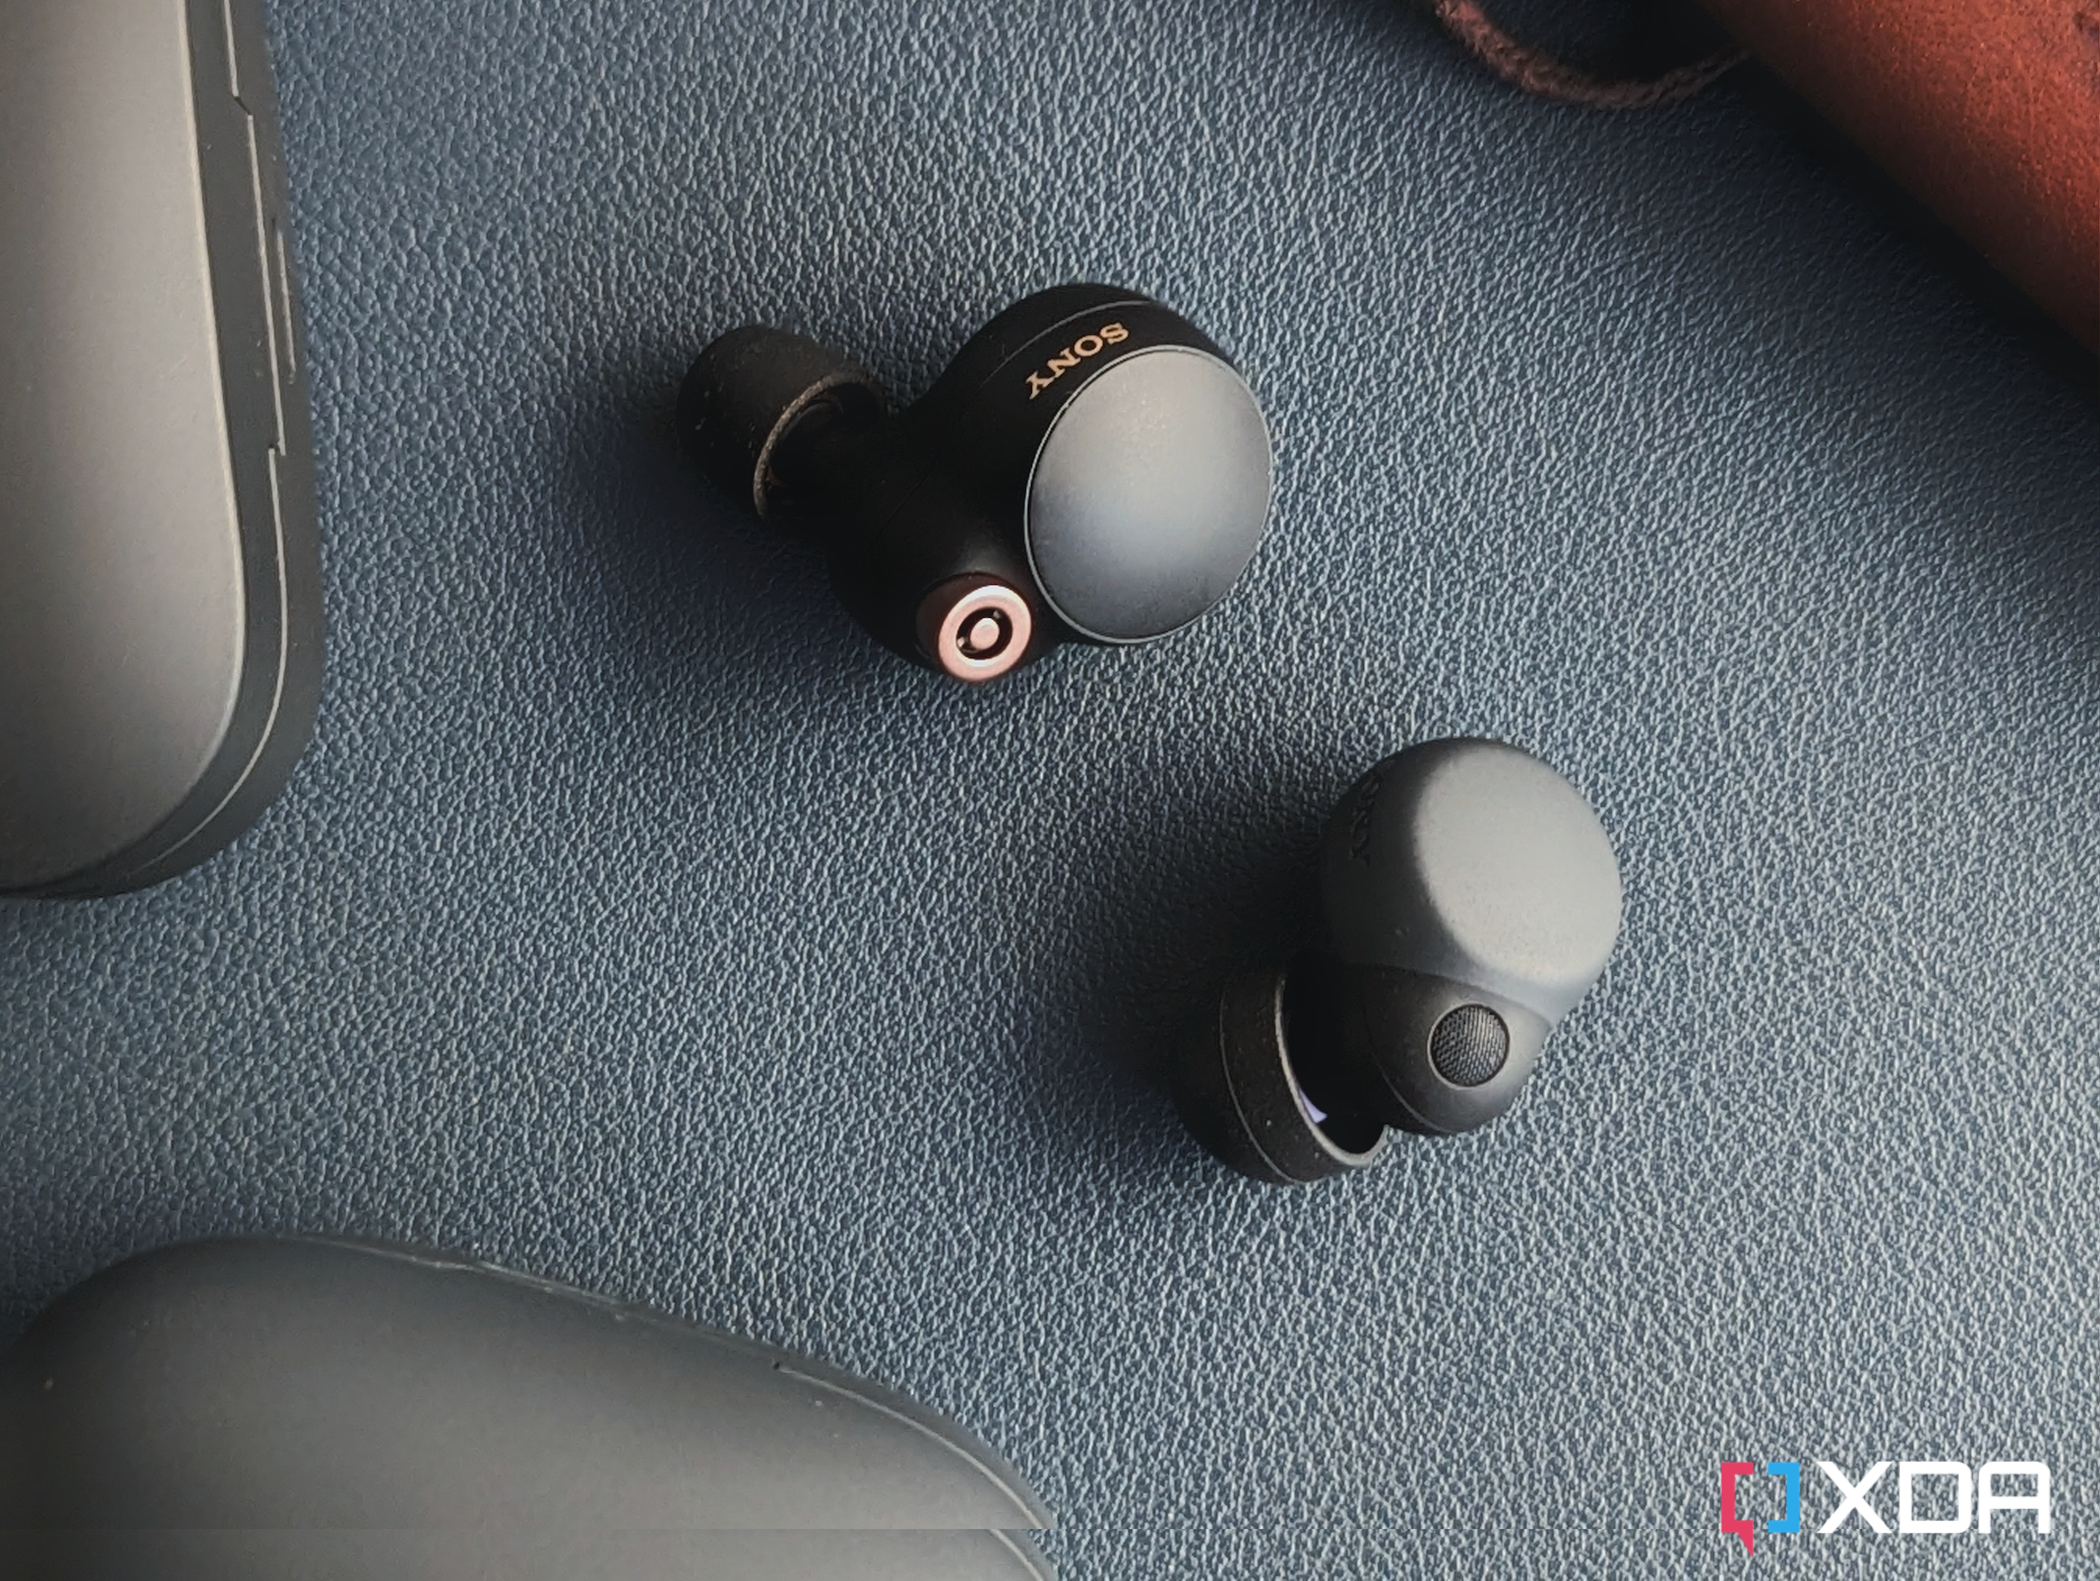 An image of the LinkBuds S and WF-1000XM4 earbuds next to each over over a leather mat.